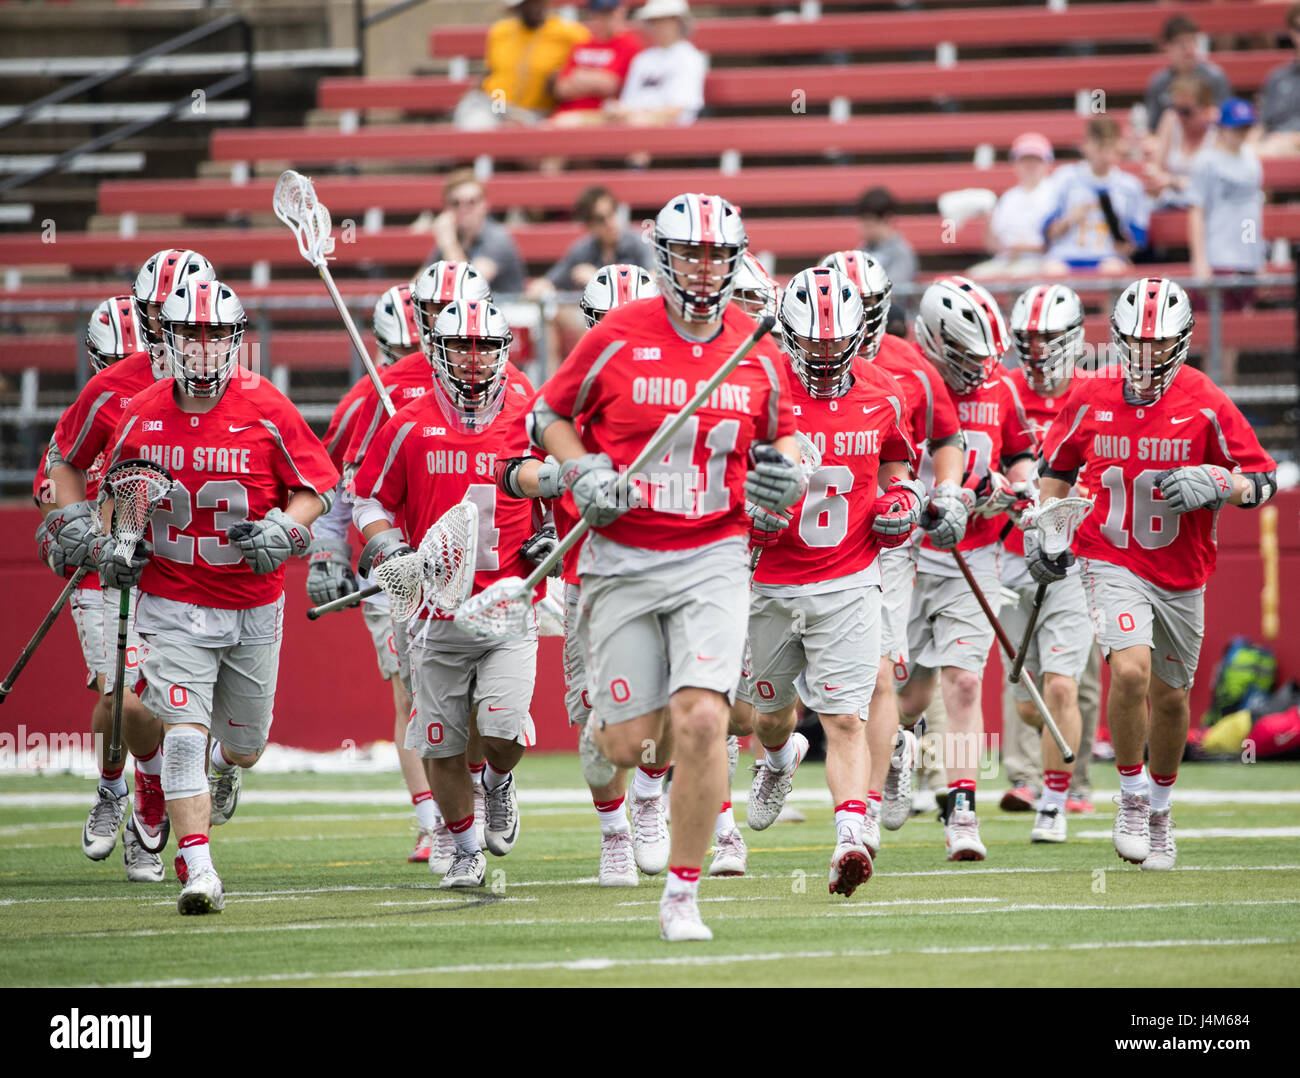 Ohio State lacrosse team running onto the field for a game against Rutgers  at High Point Solutions Stadium in Piscataway, New Jersey Stock Photo -  Alamy